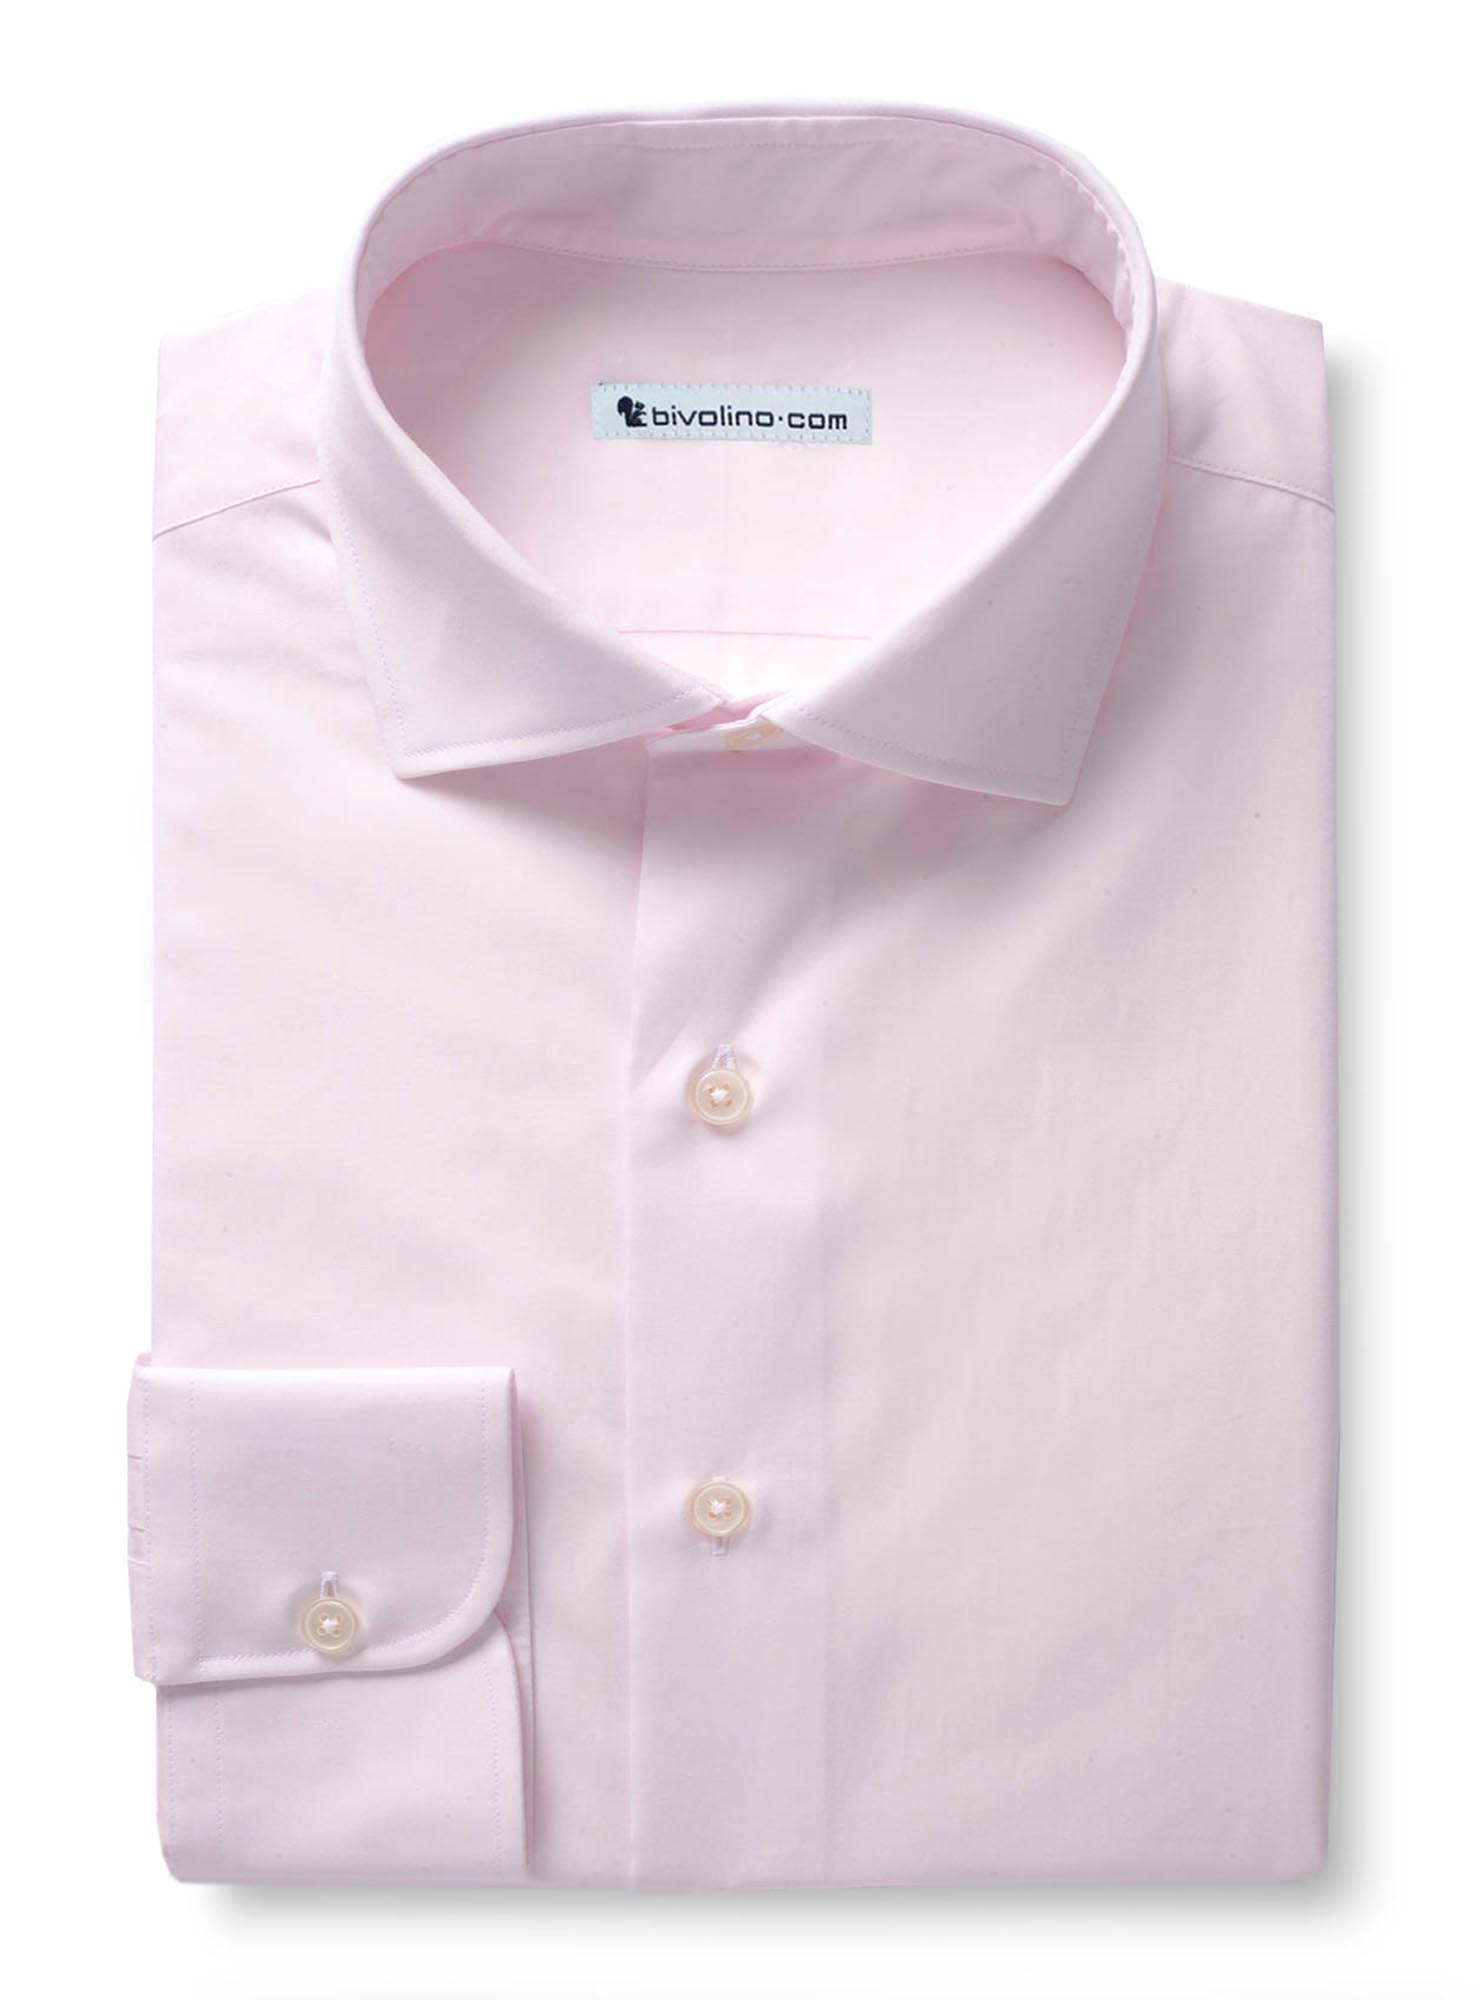 made to measure shirts online